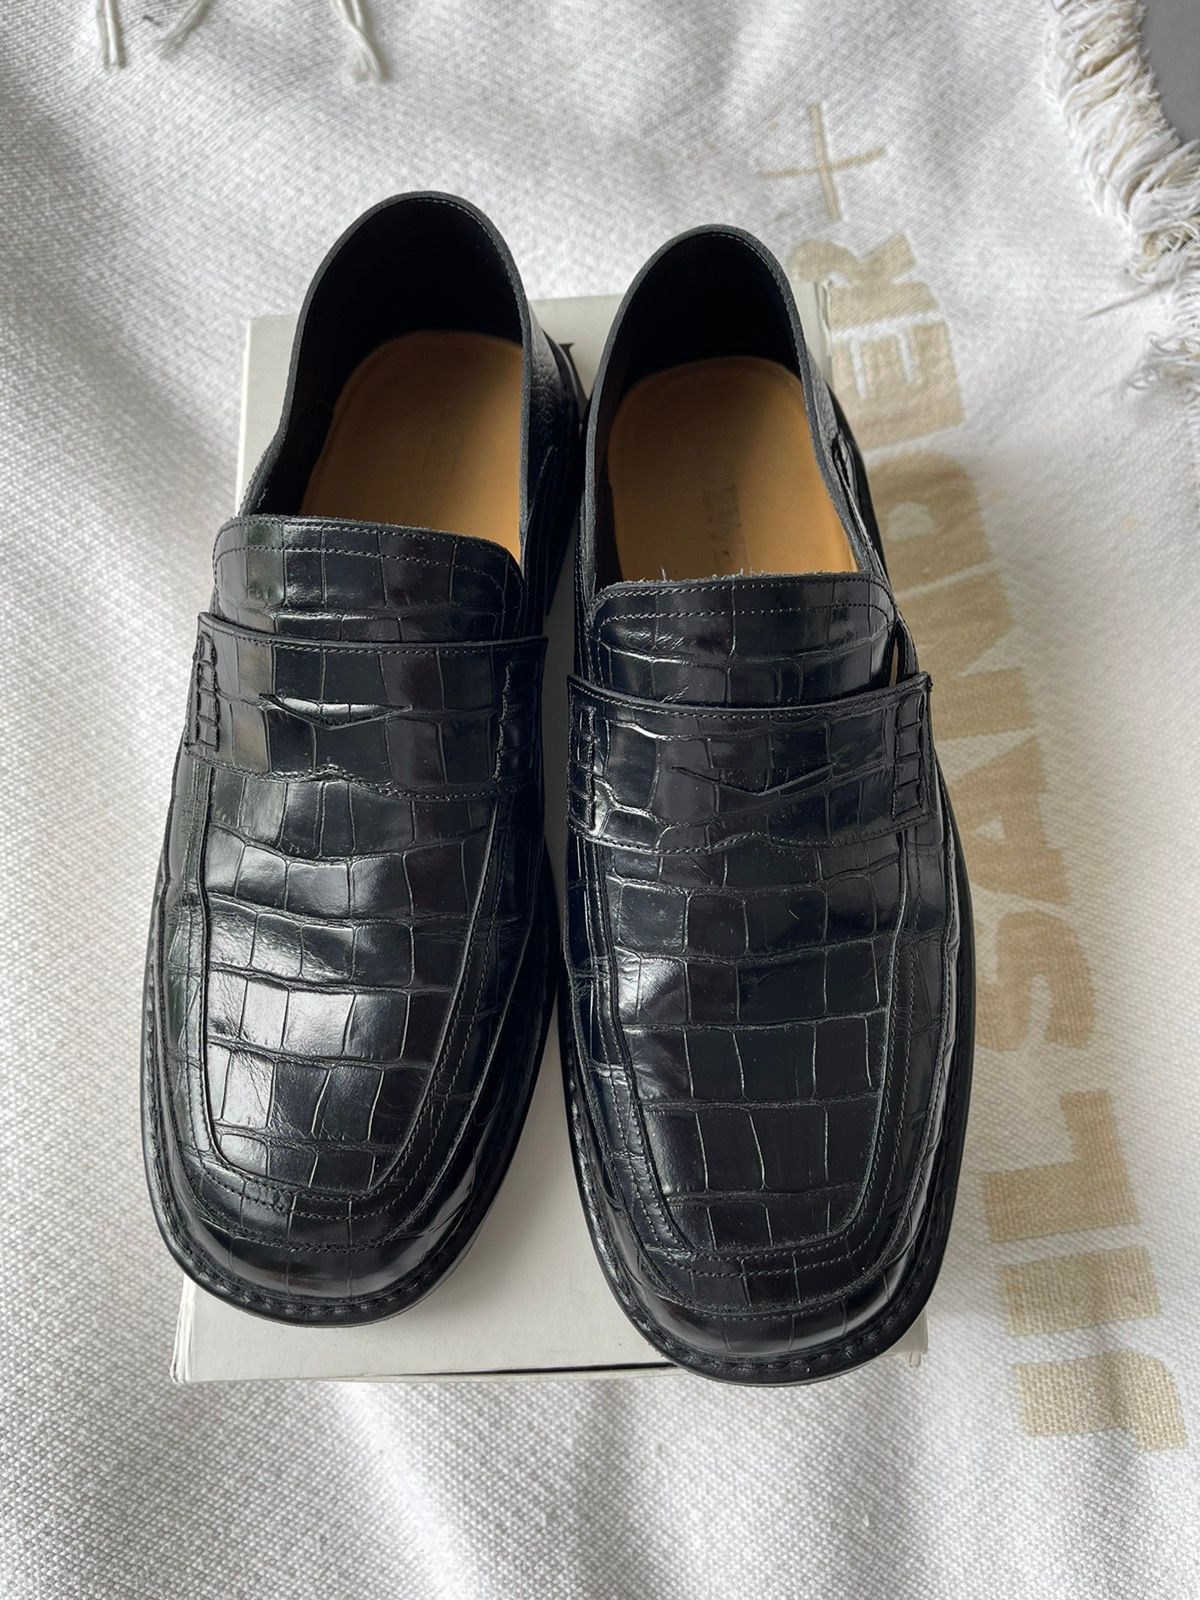 Pre-owned Loewe Collapsible Heel Shoes Croc Loafer In Black